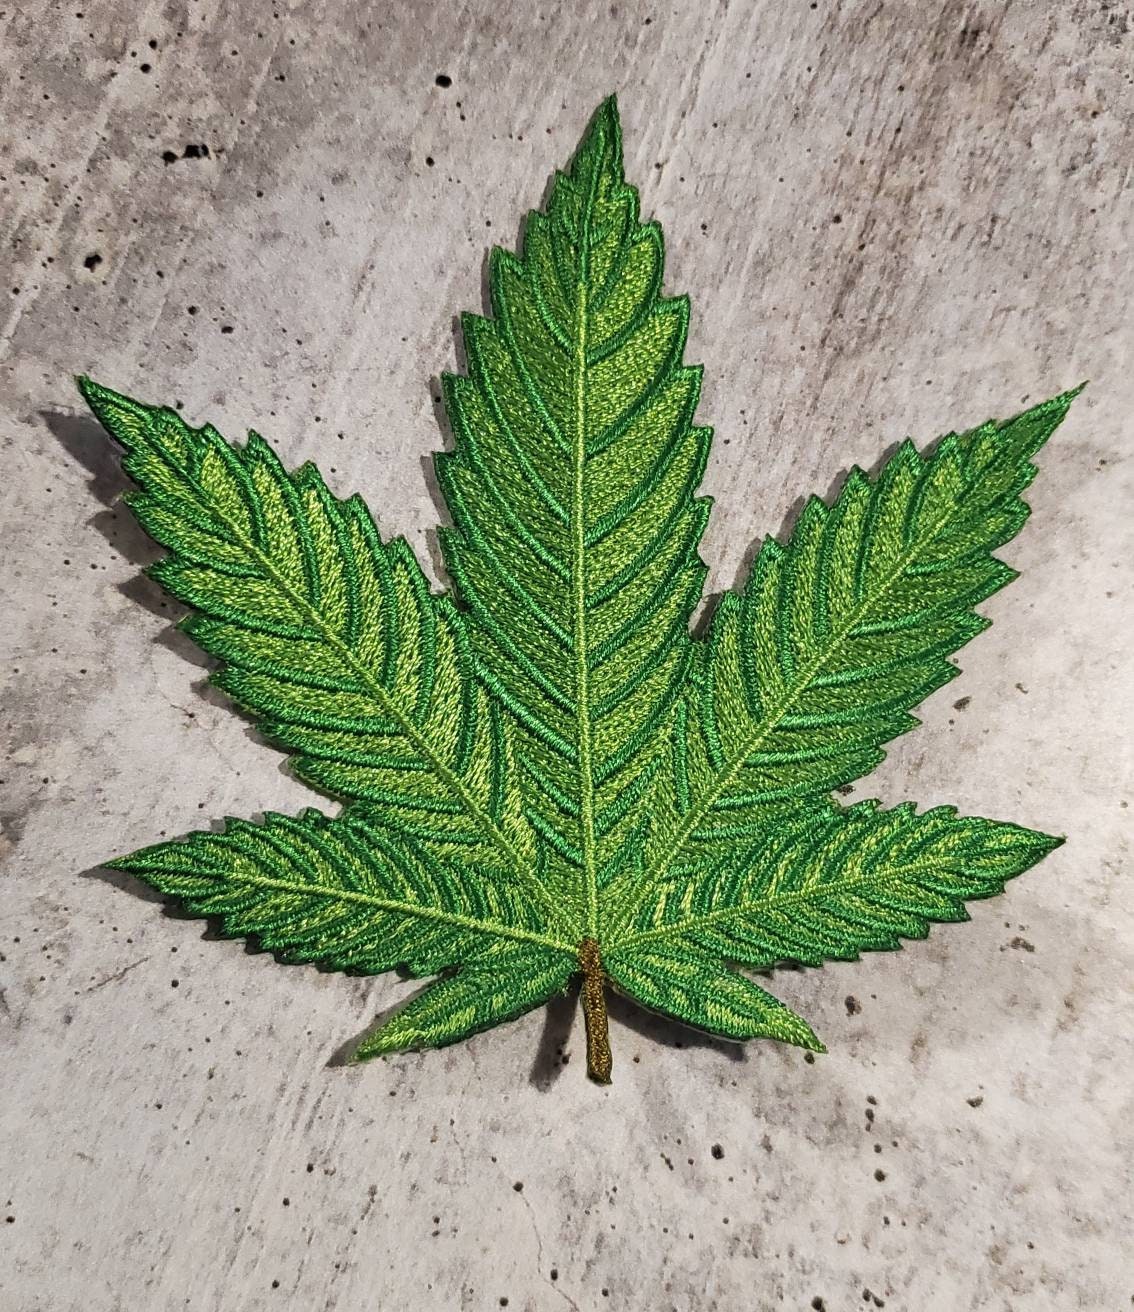 NEW, Limited Edition, "Cannabis Leaf" Iron-On Patch, Embroidered Patch Grab Bag, Patches for Weed Lovers, Cannabis Badge, THC, CBD Lovers,4"